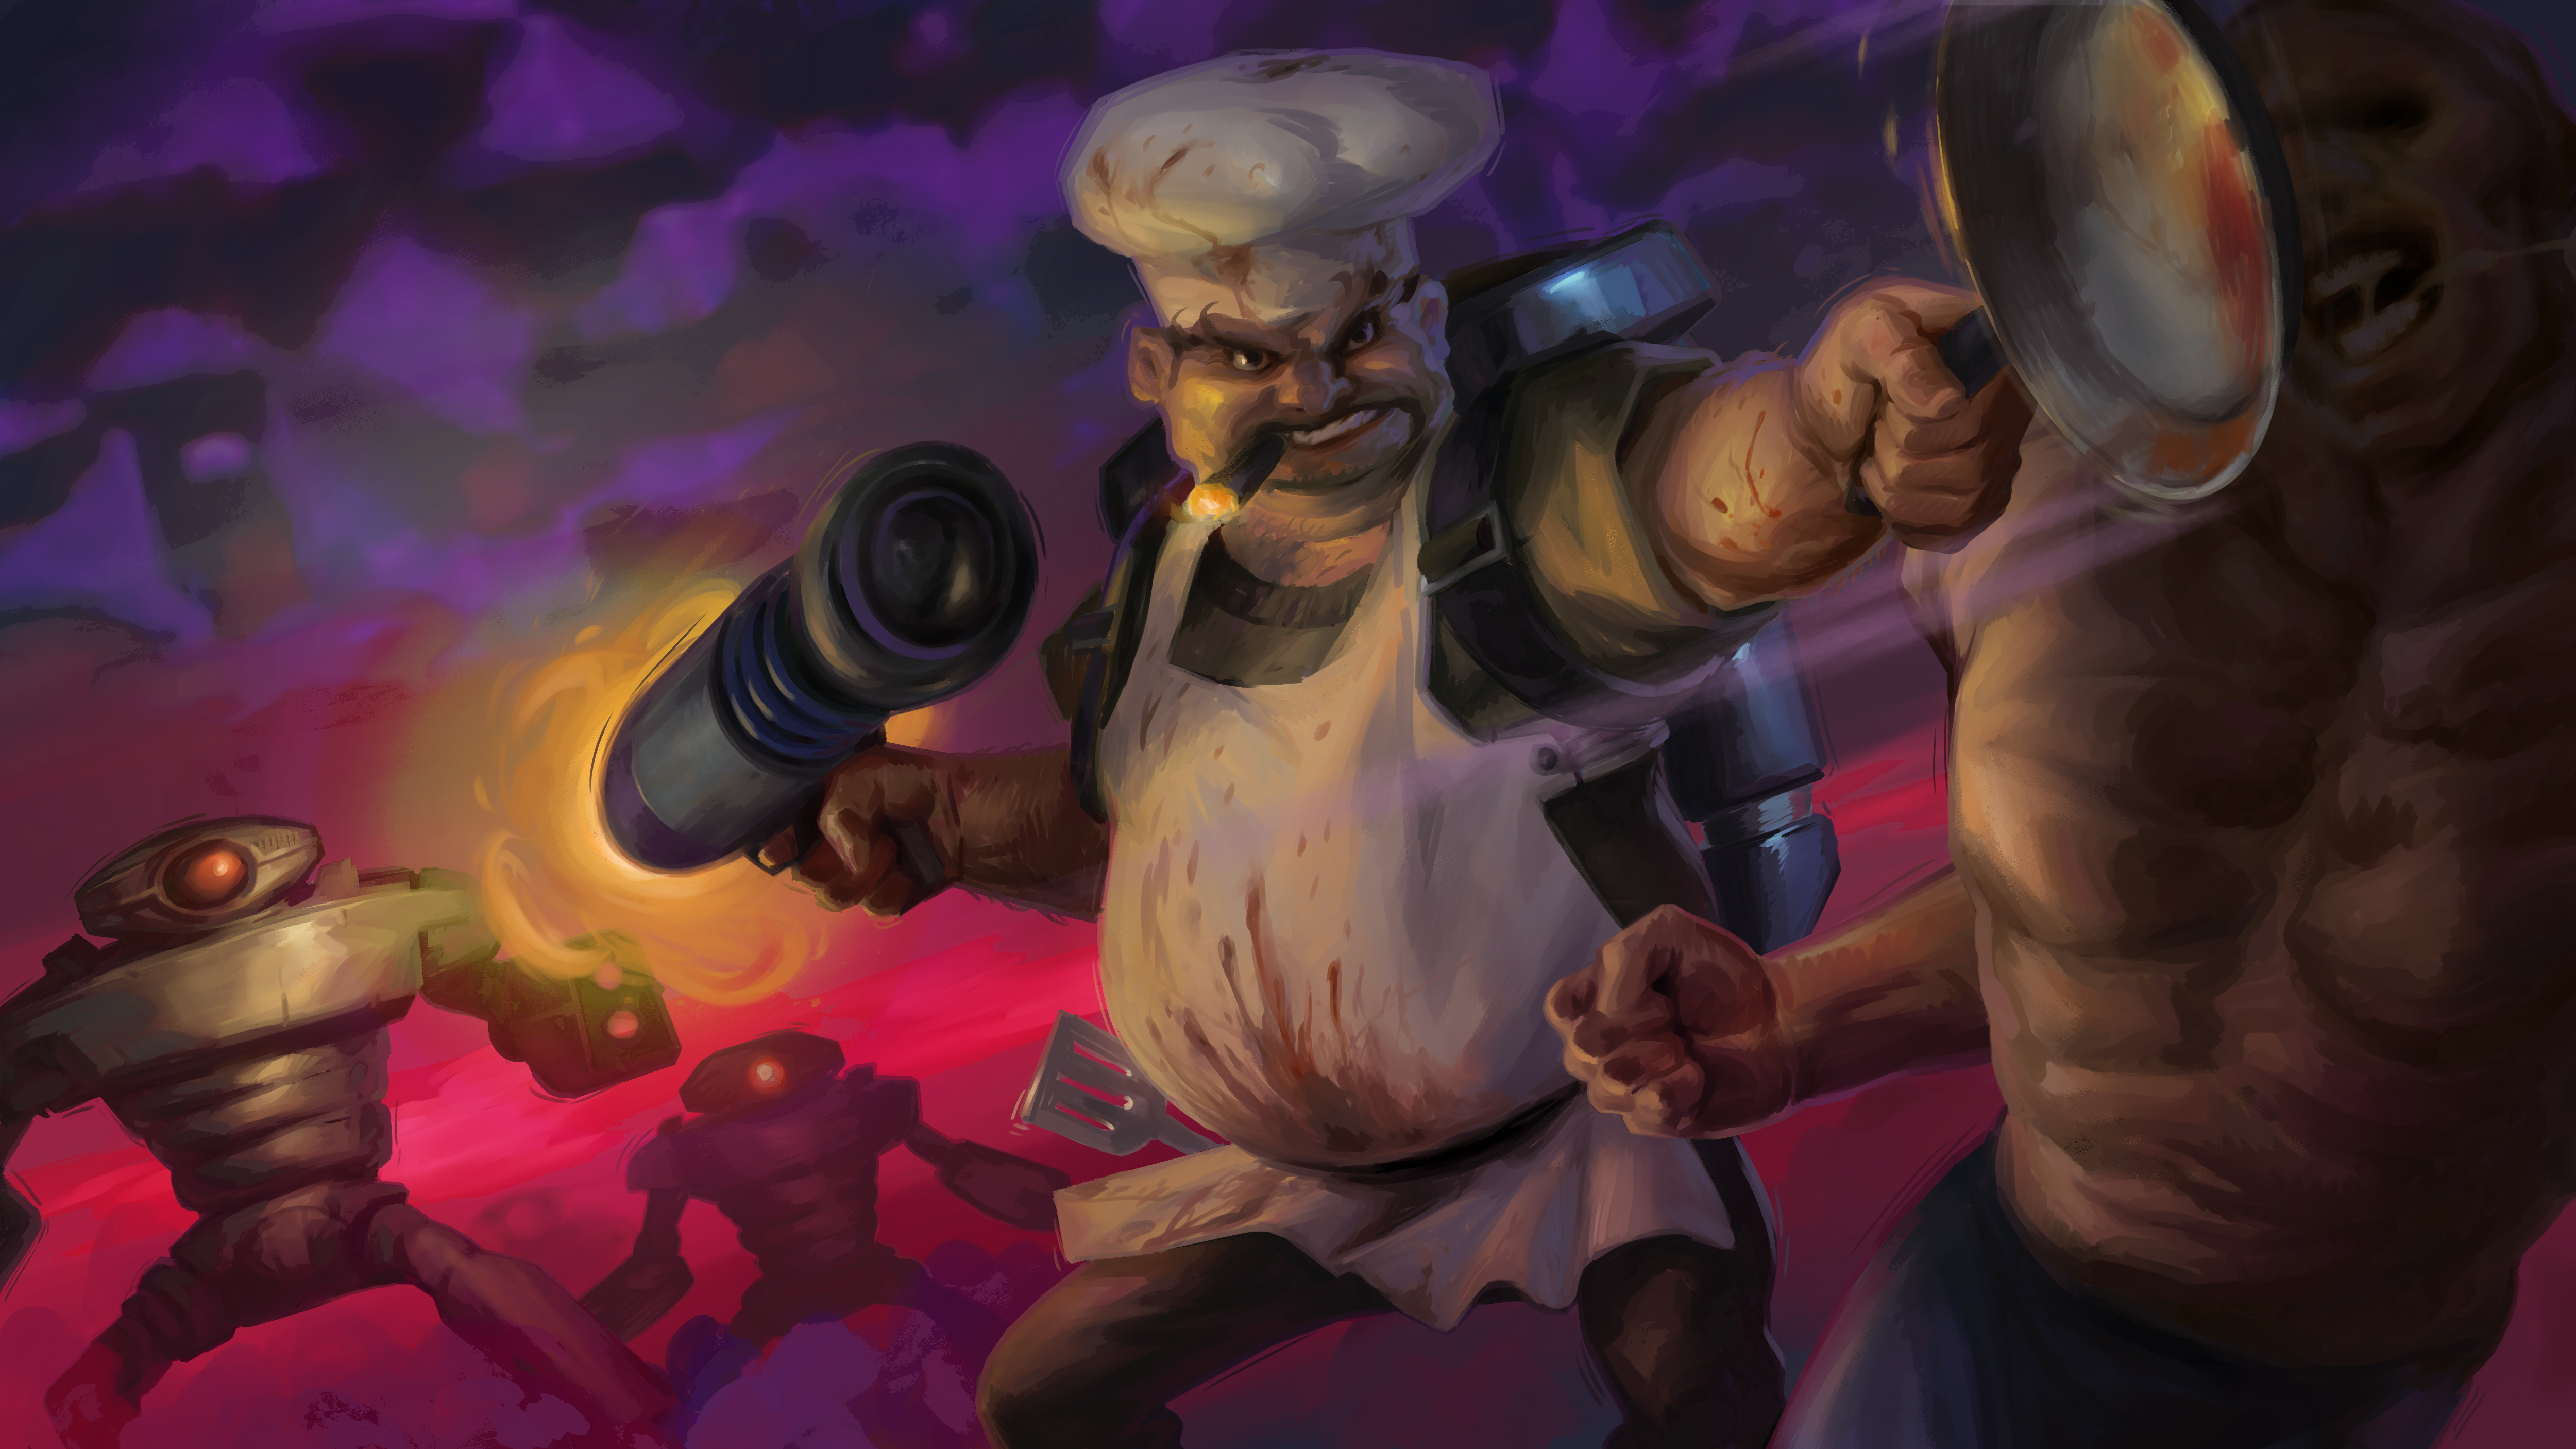  Nightdive's next game, about a chef in space who battles aliens with a frying pan, is coming next week 